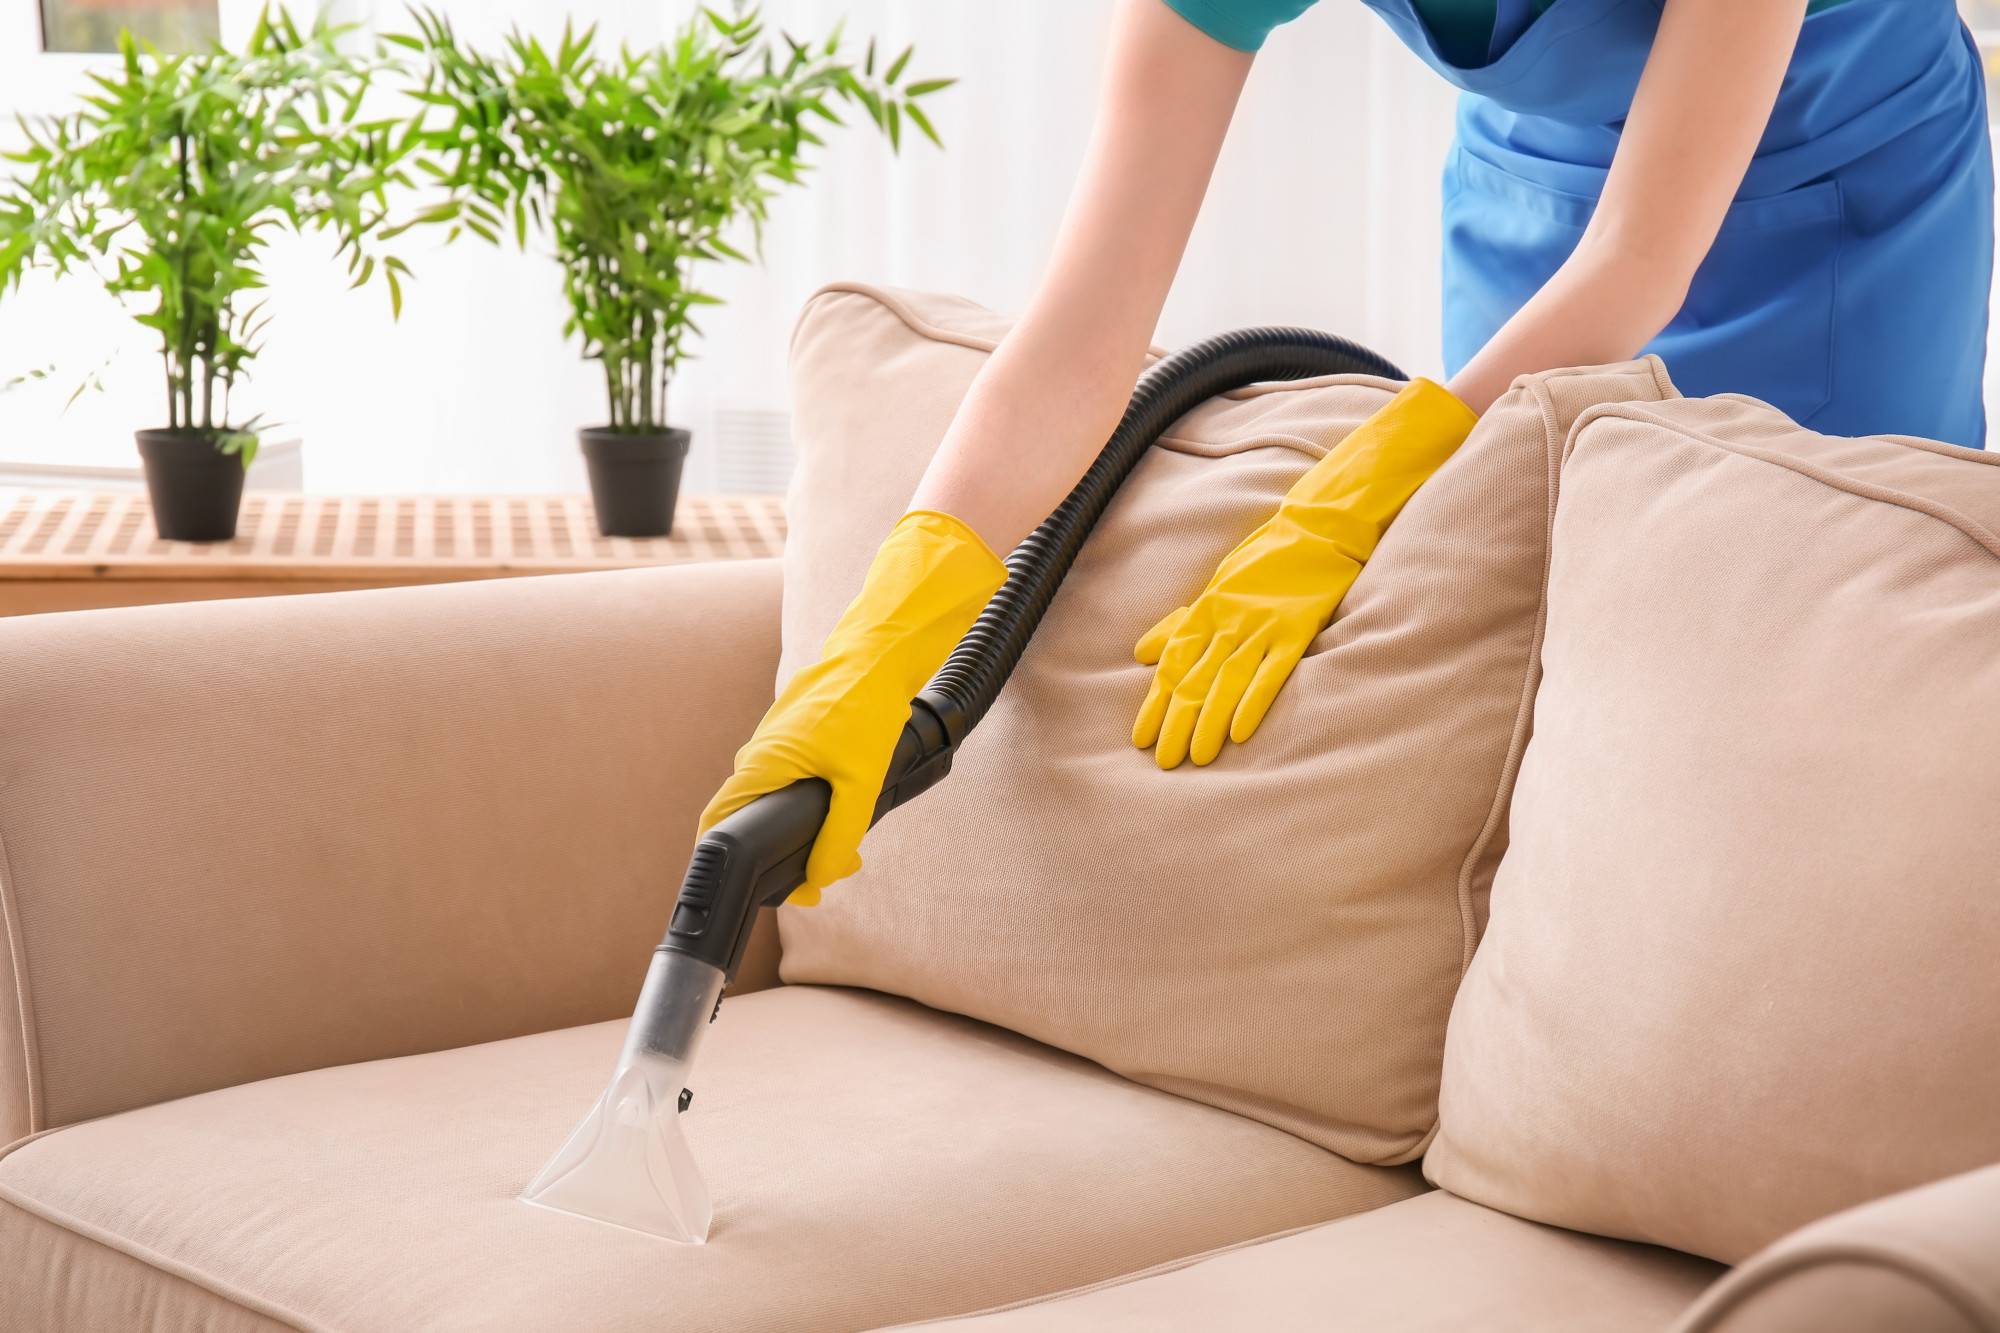 Gift Ideas for Mom: Giving the Gift of a Clean Home